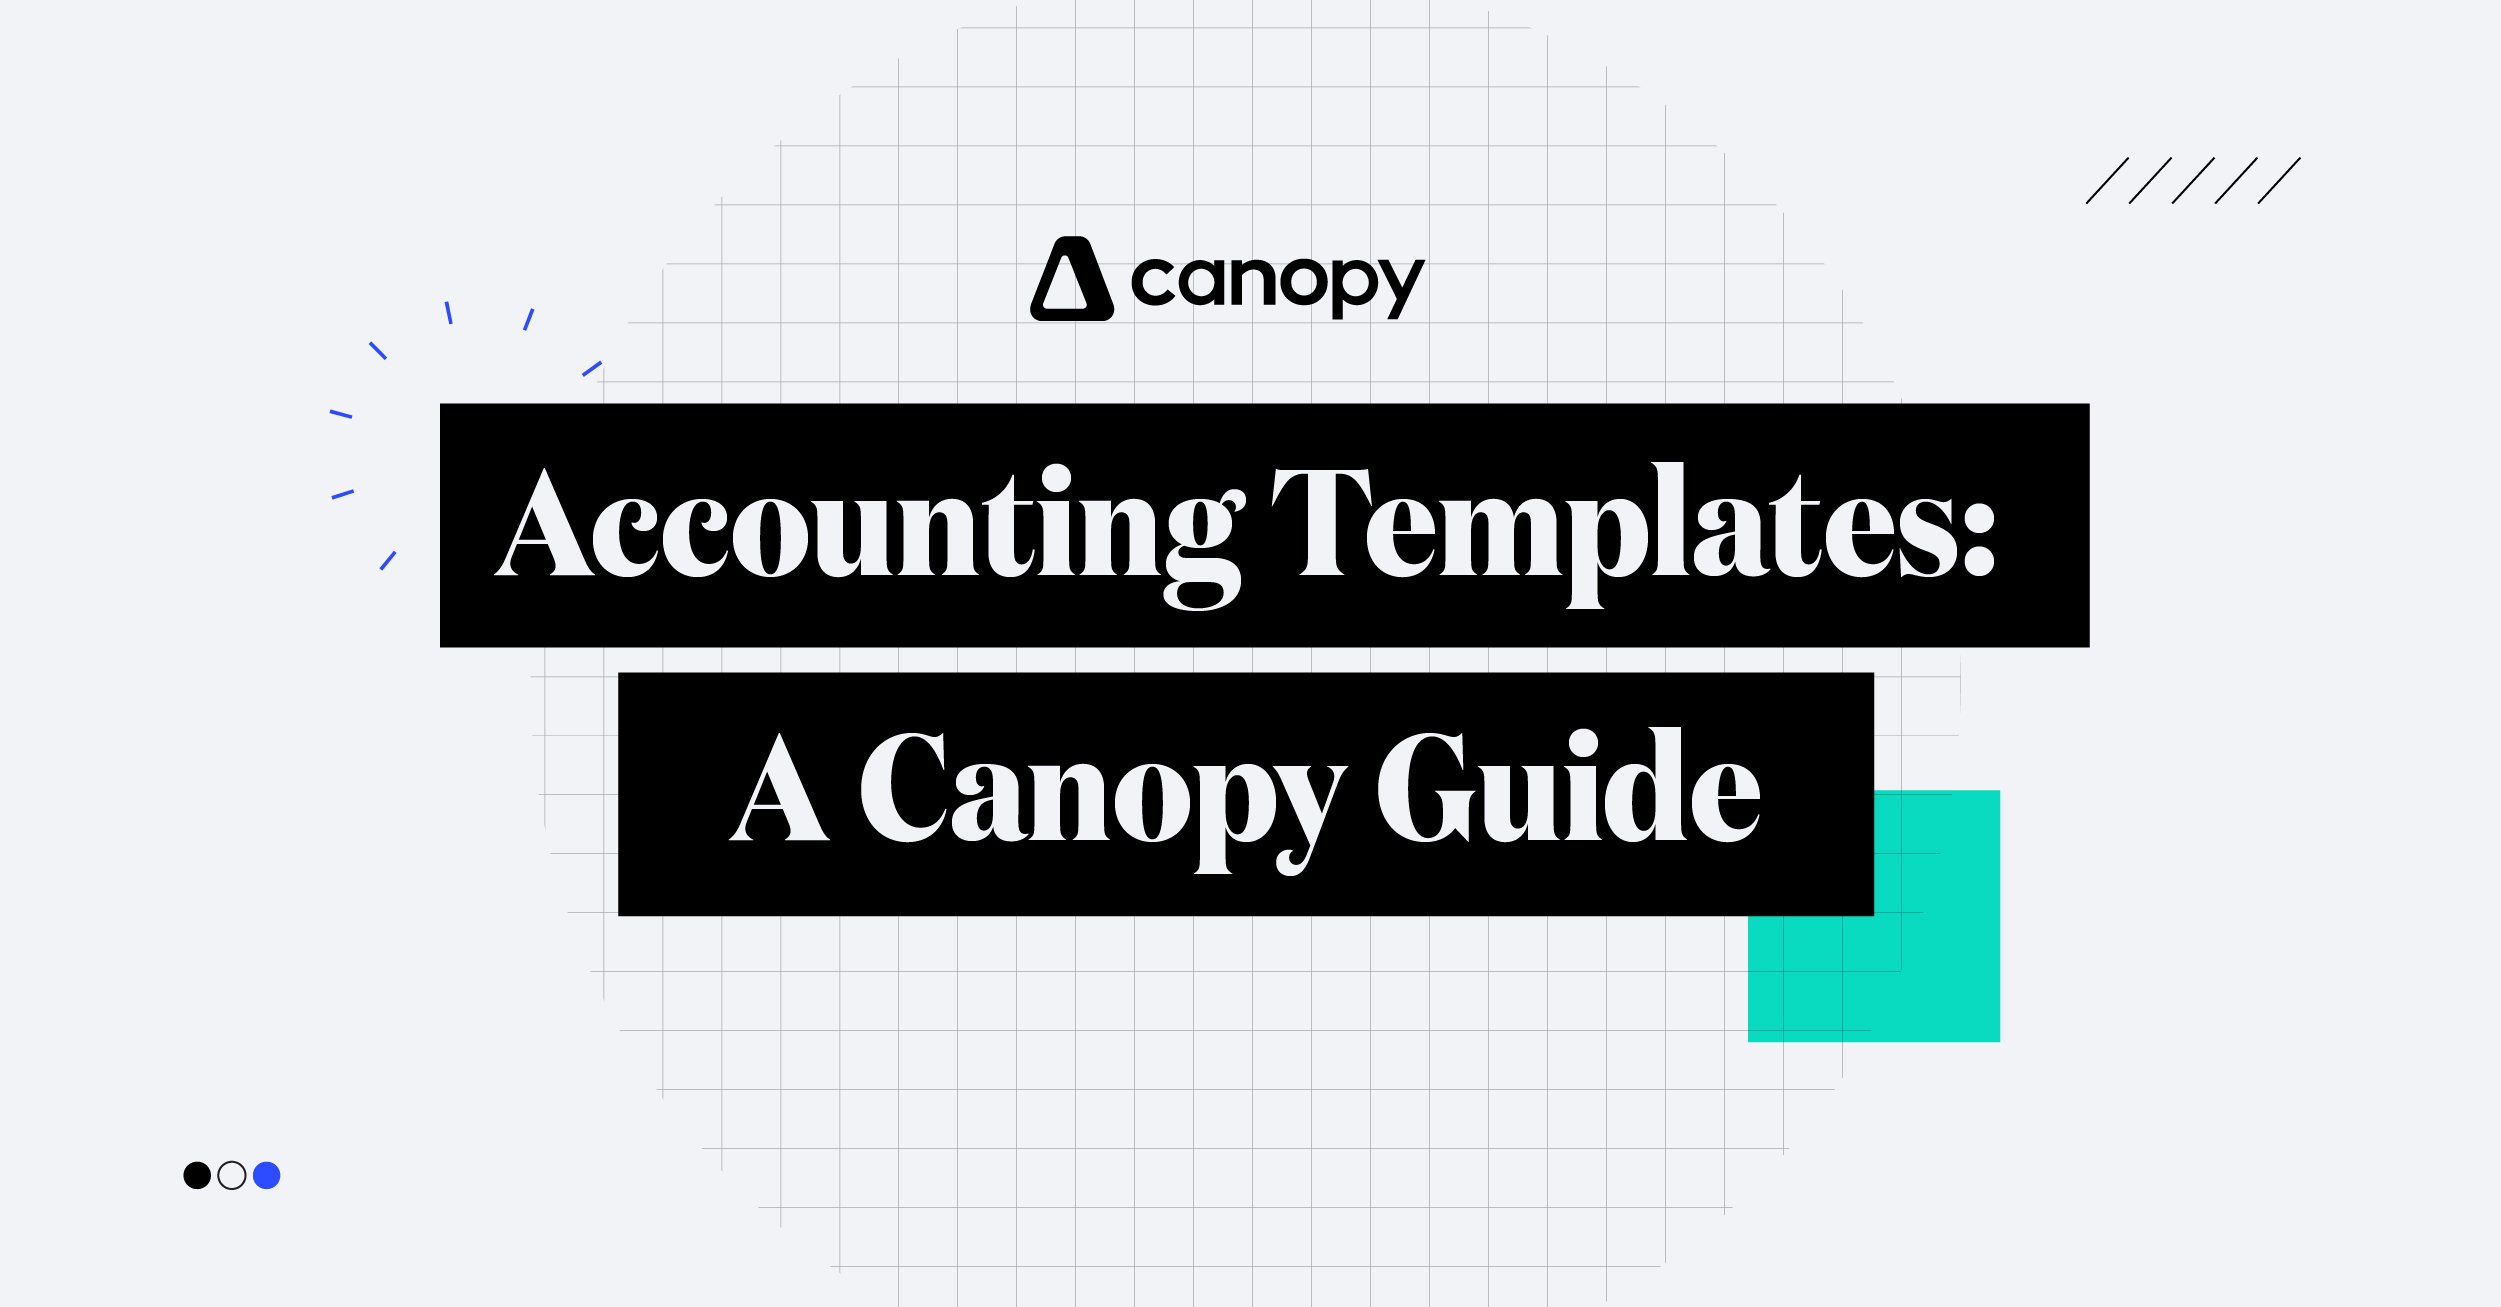 Accounting Templates: A Canopy Guide